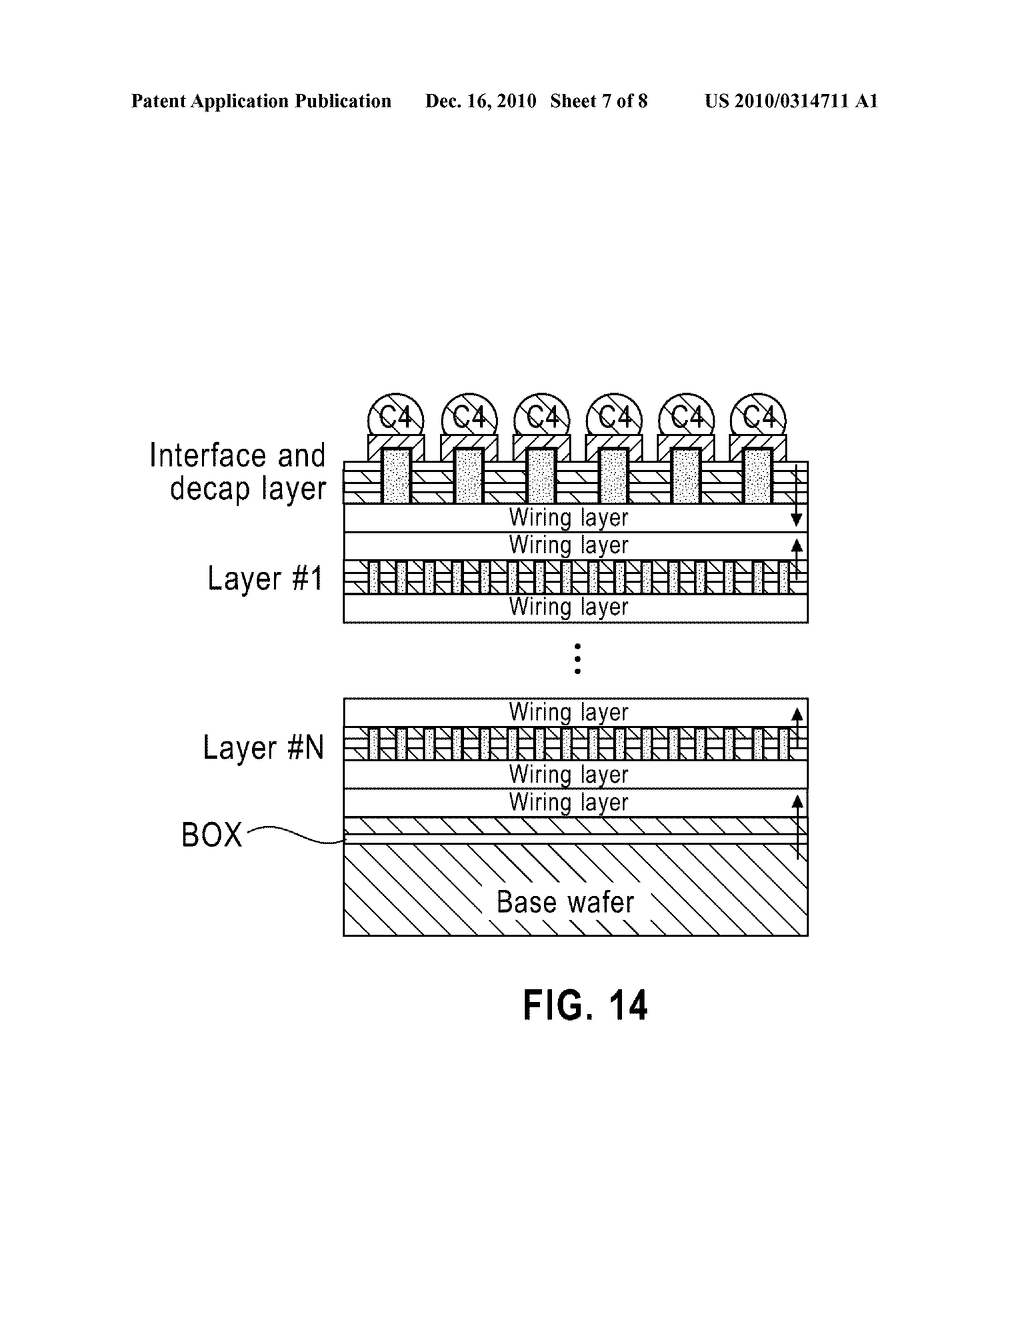 3D INTEGRATED CIRCUIT DEVICE HAVING LOWER-COST ACTIVE CIRCUITRY LAYERS STACKED BEFORE HIGHER-COST ACTIVE CIRCUITRY LAYER - diagram, schematic, and image 08